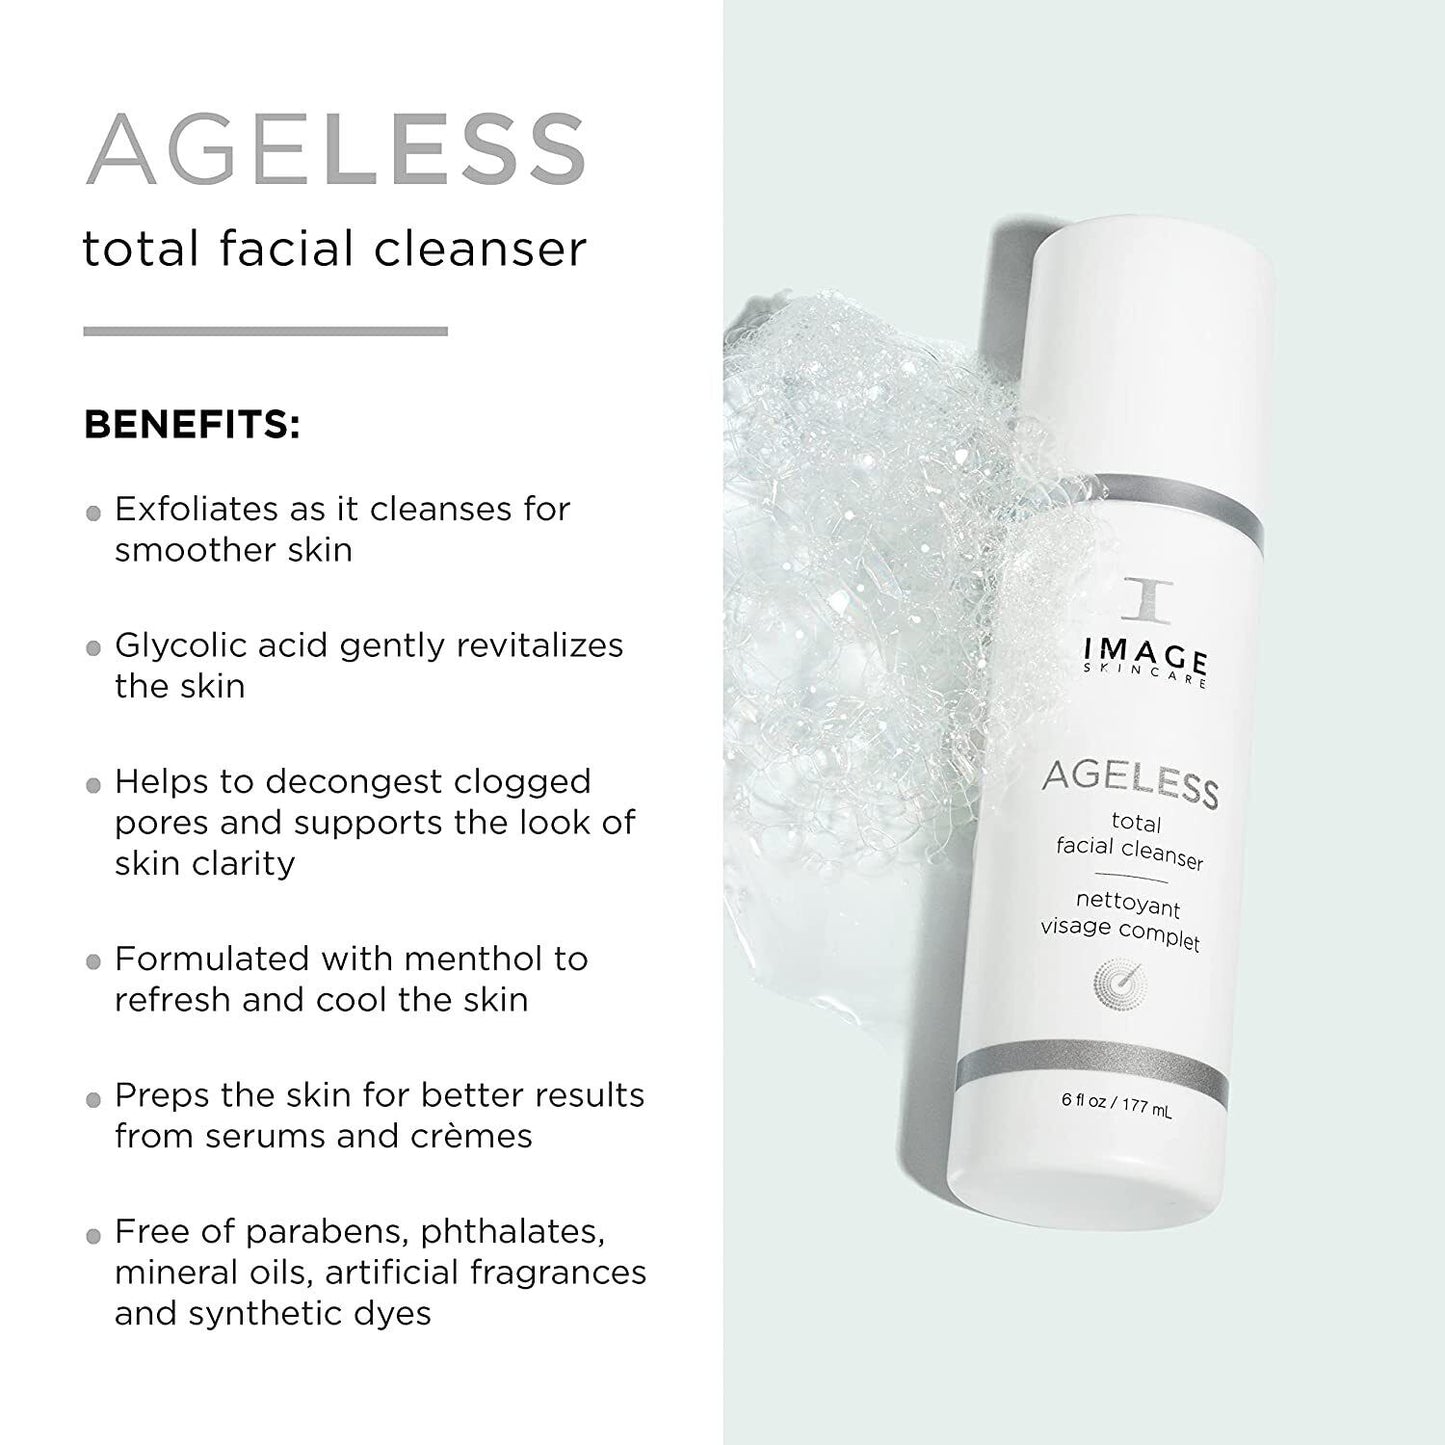 Nettoyant Ageless facial total